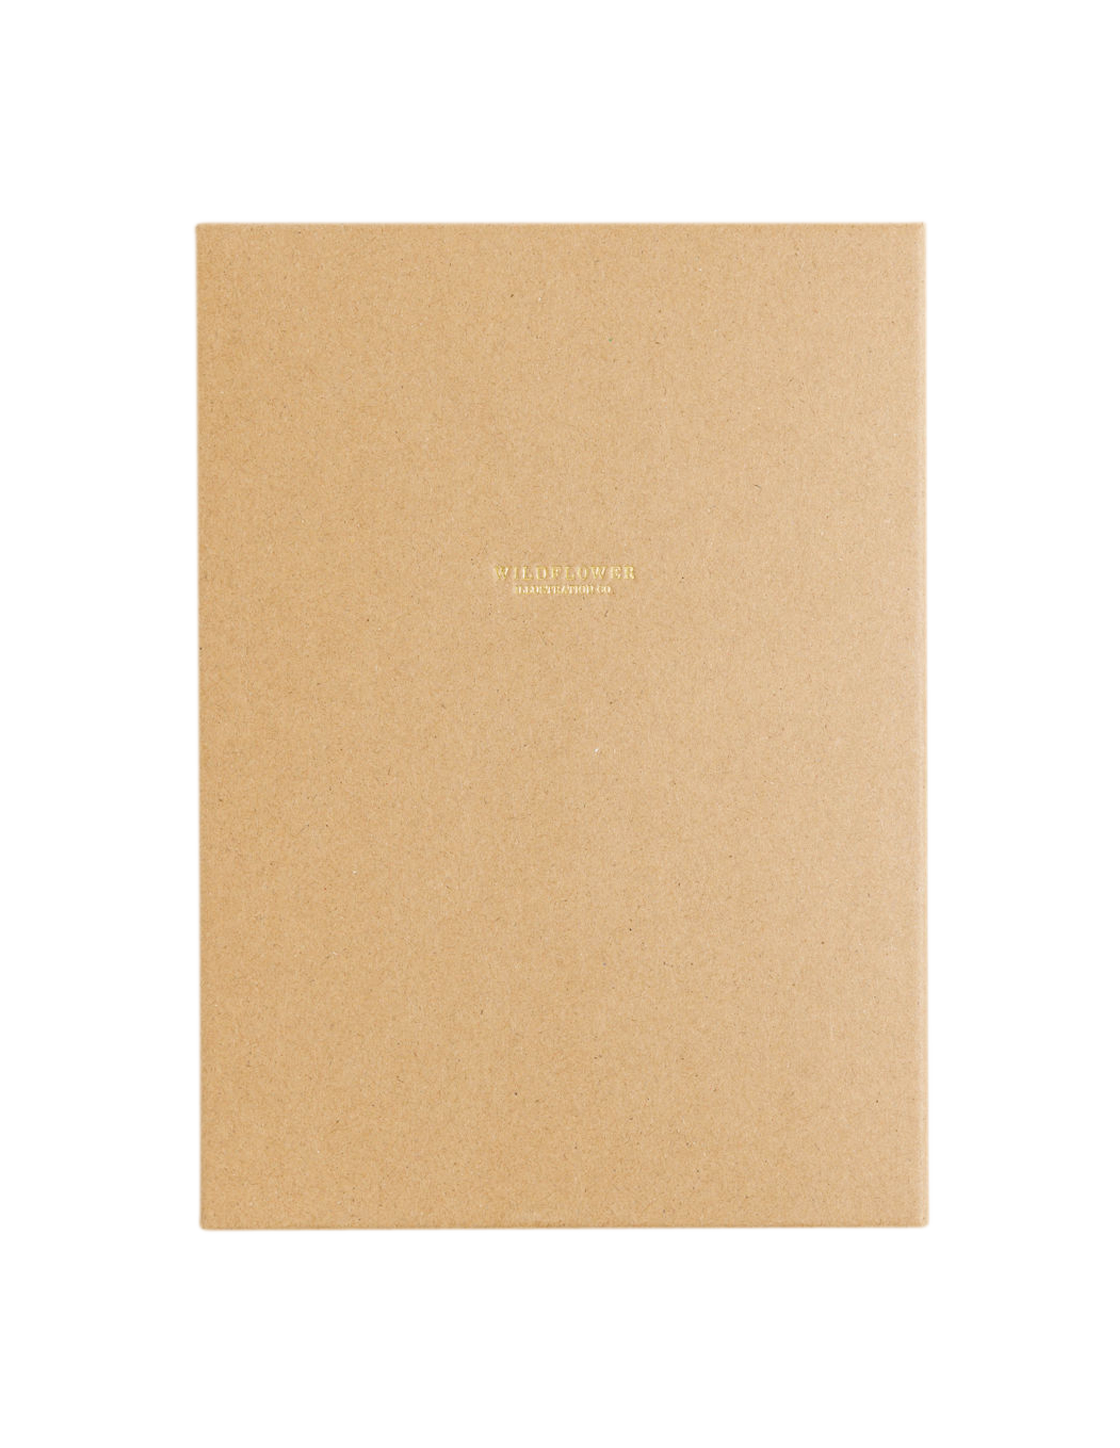 Stationery Collection - Books